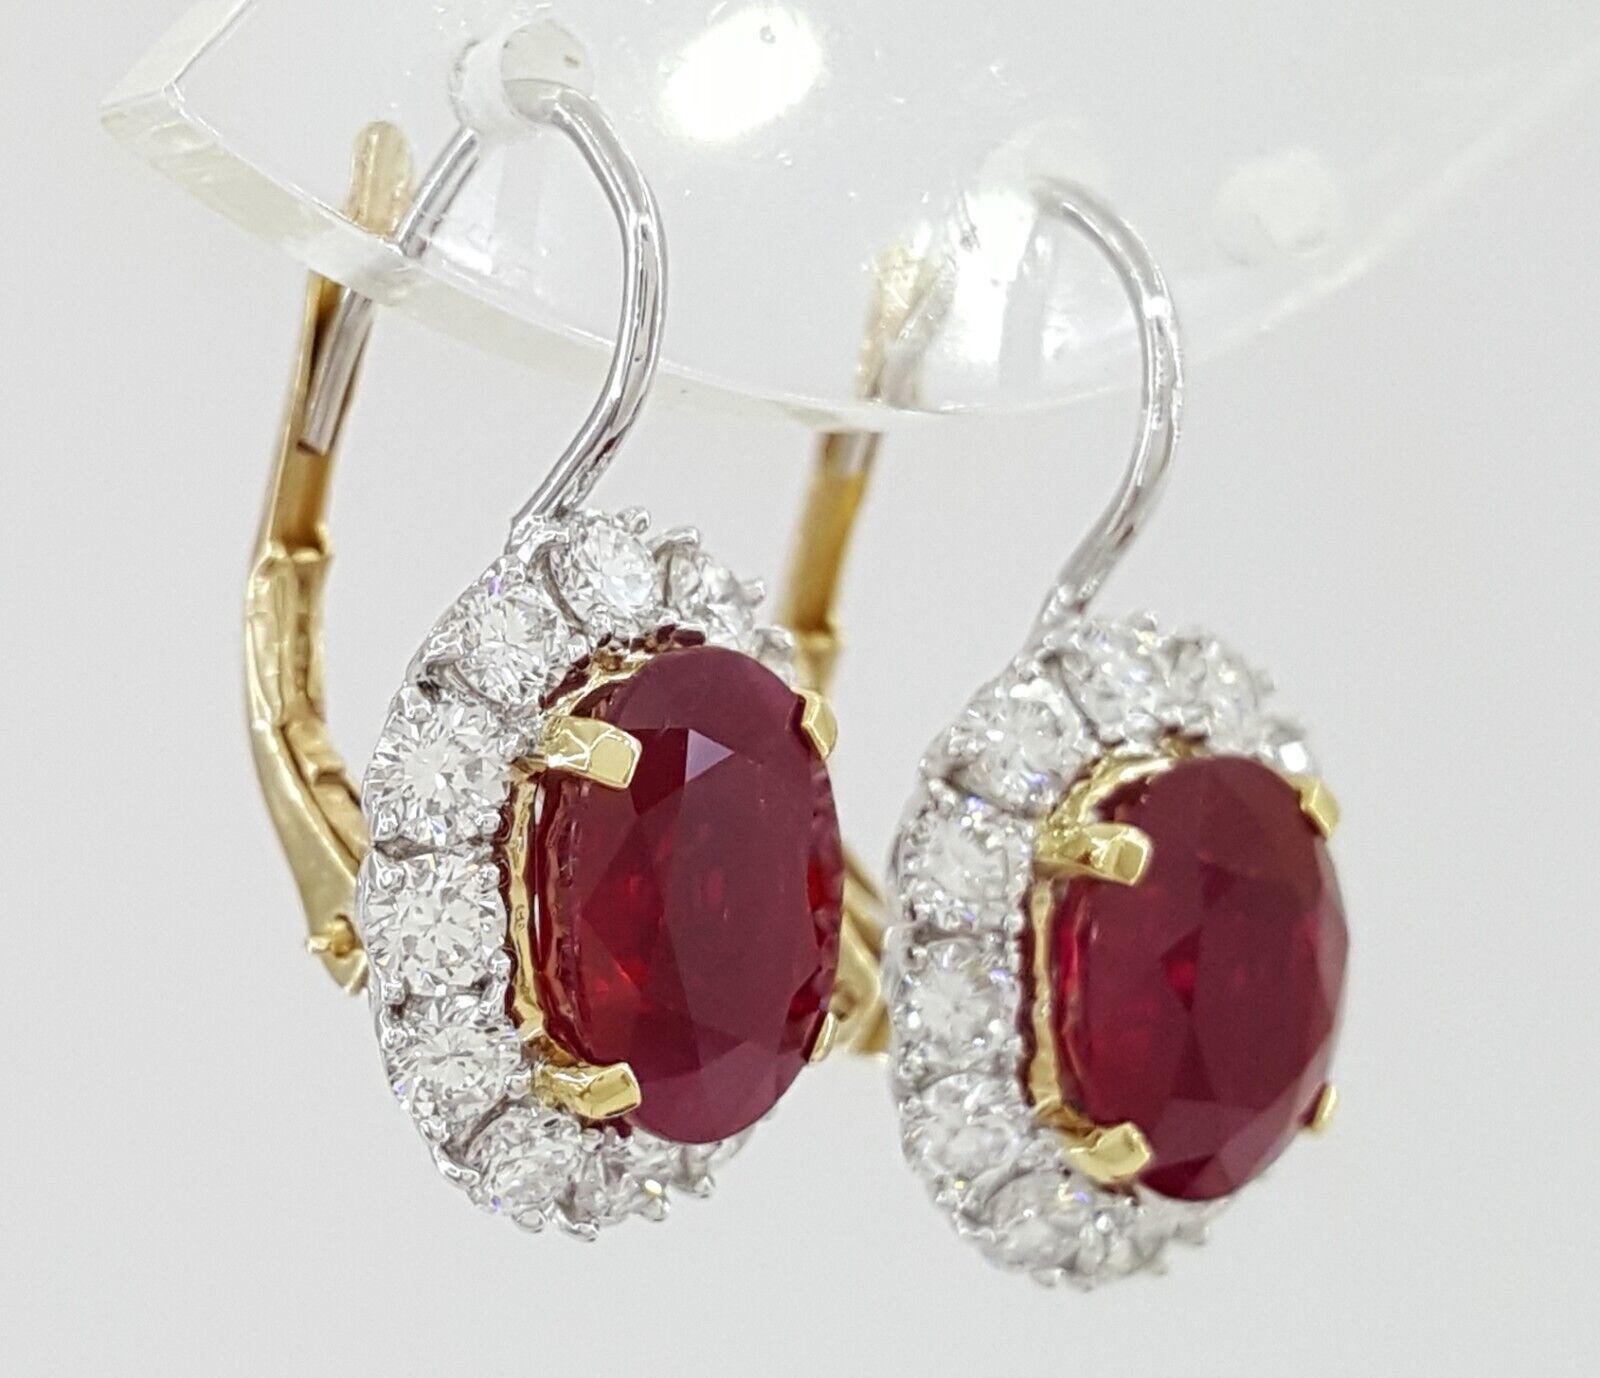 Experience unparalleled elegance with our exquisite 18K White & Yellow Gold Earrings, featuring a total weight of 6.55 ct of mesmerizing Natural Oval Cut Burma Pigeon Blood Rubies and sparkling Diamonds.
Admire the two Natural Oval Cut Vivid Pigeon